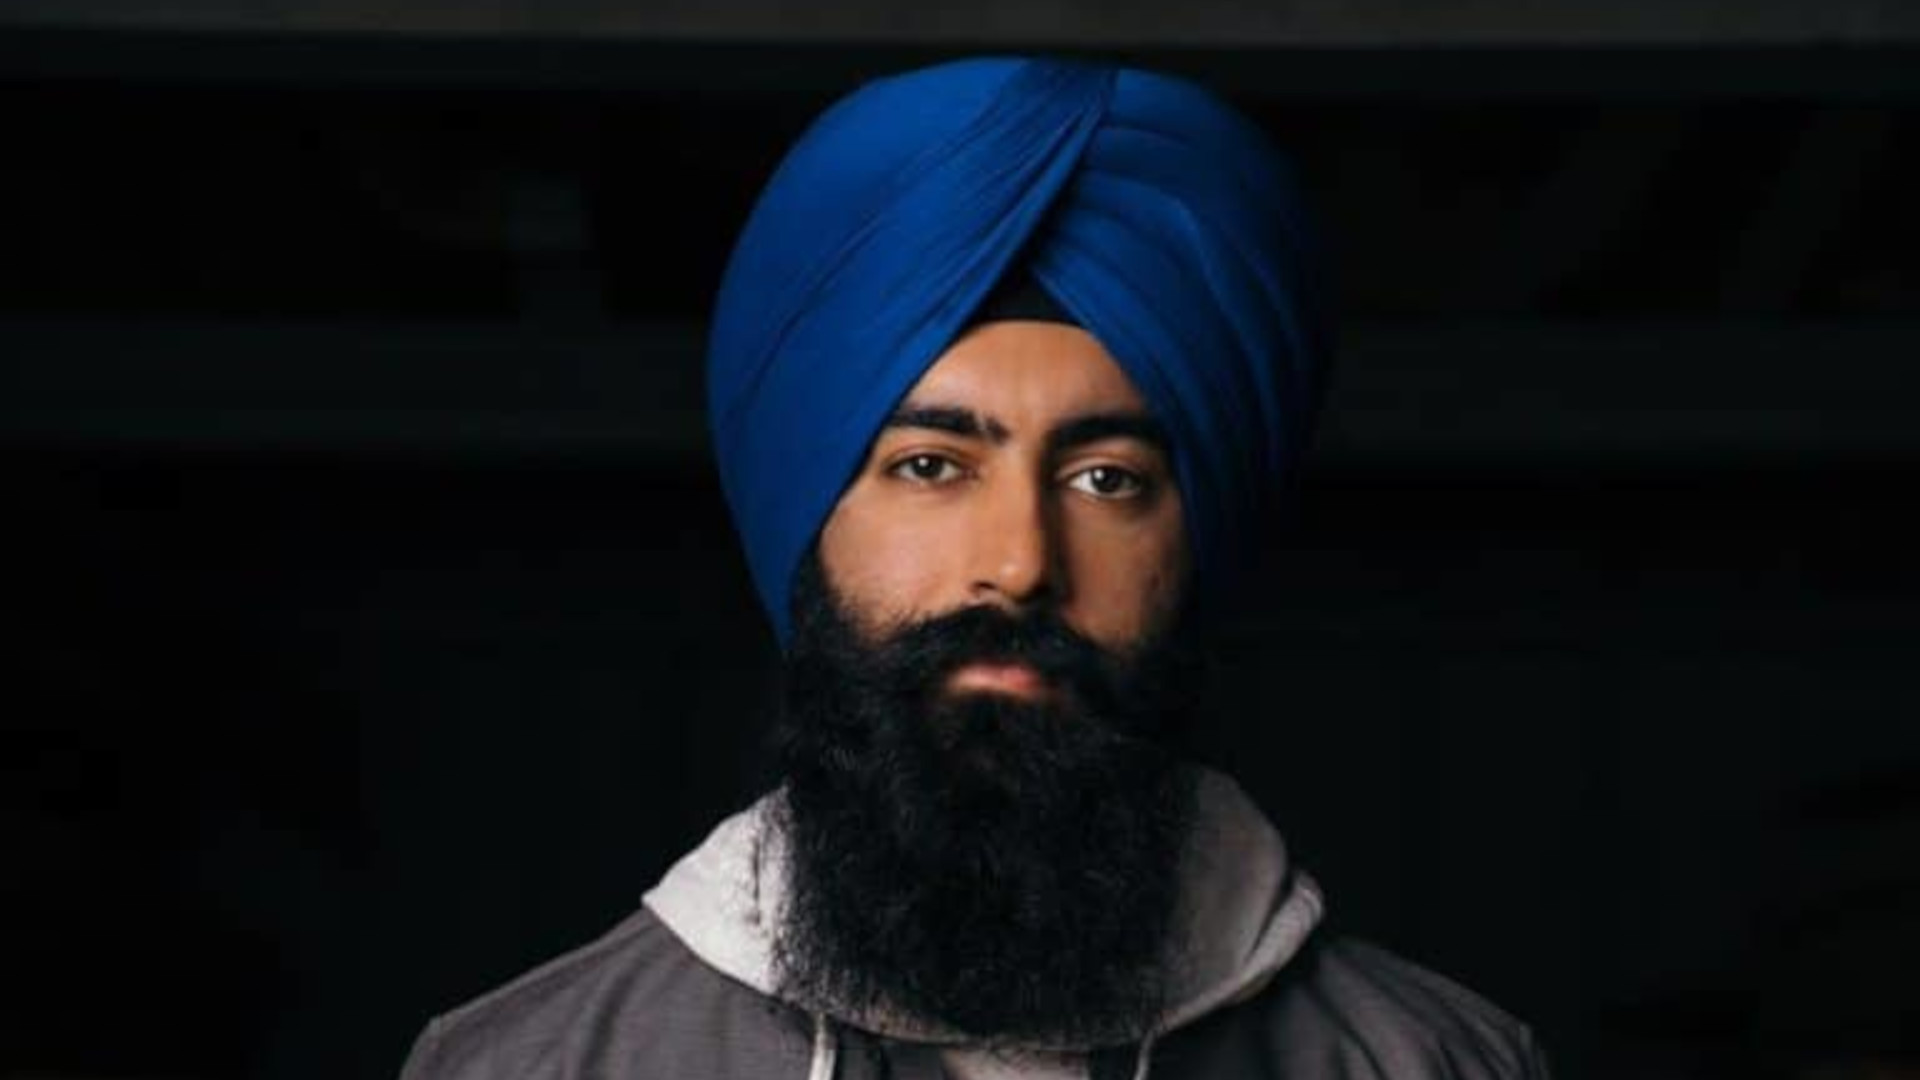 jaspreet singh says you shouldn’t start a business to get rich — do this instead